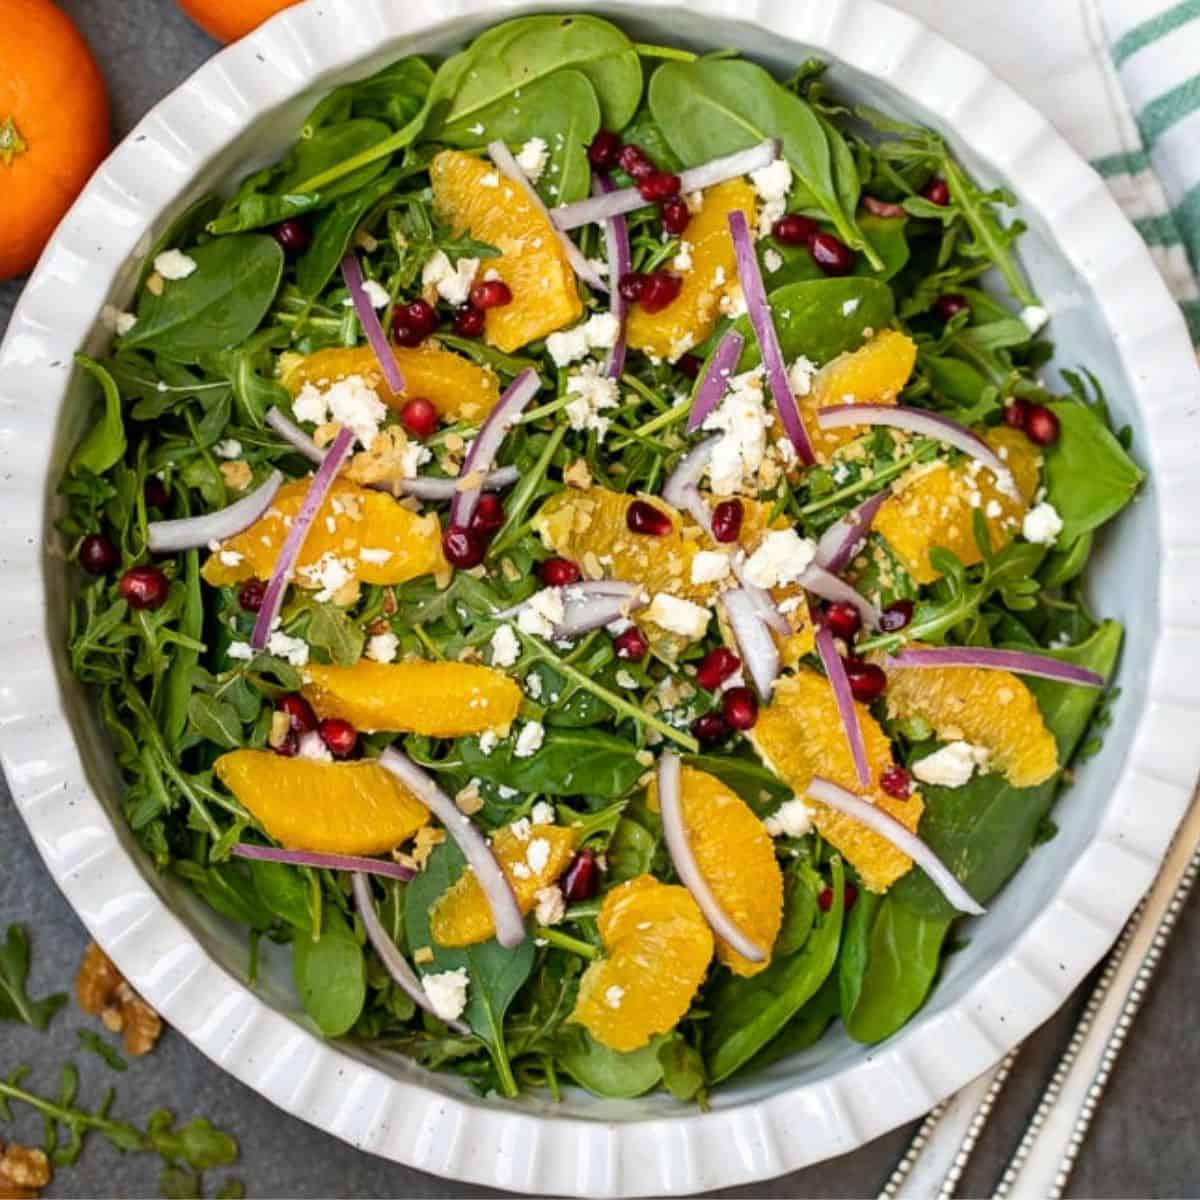 Mixed greens topped with pomegranate, oranges, toasted nuts and champagne vinaigrette.